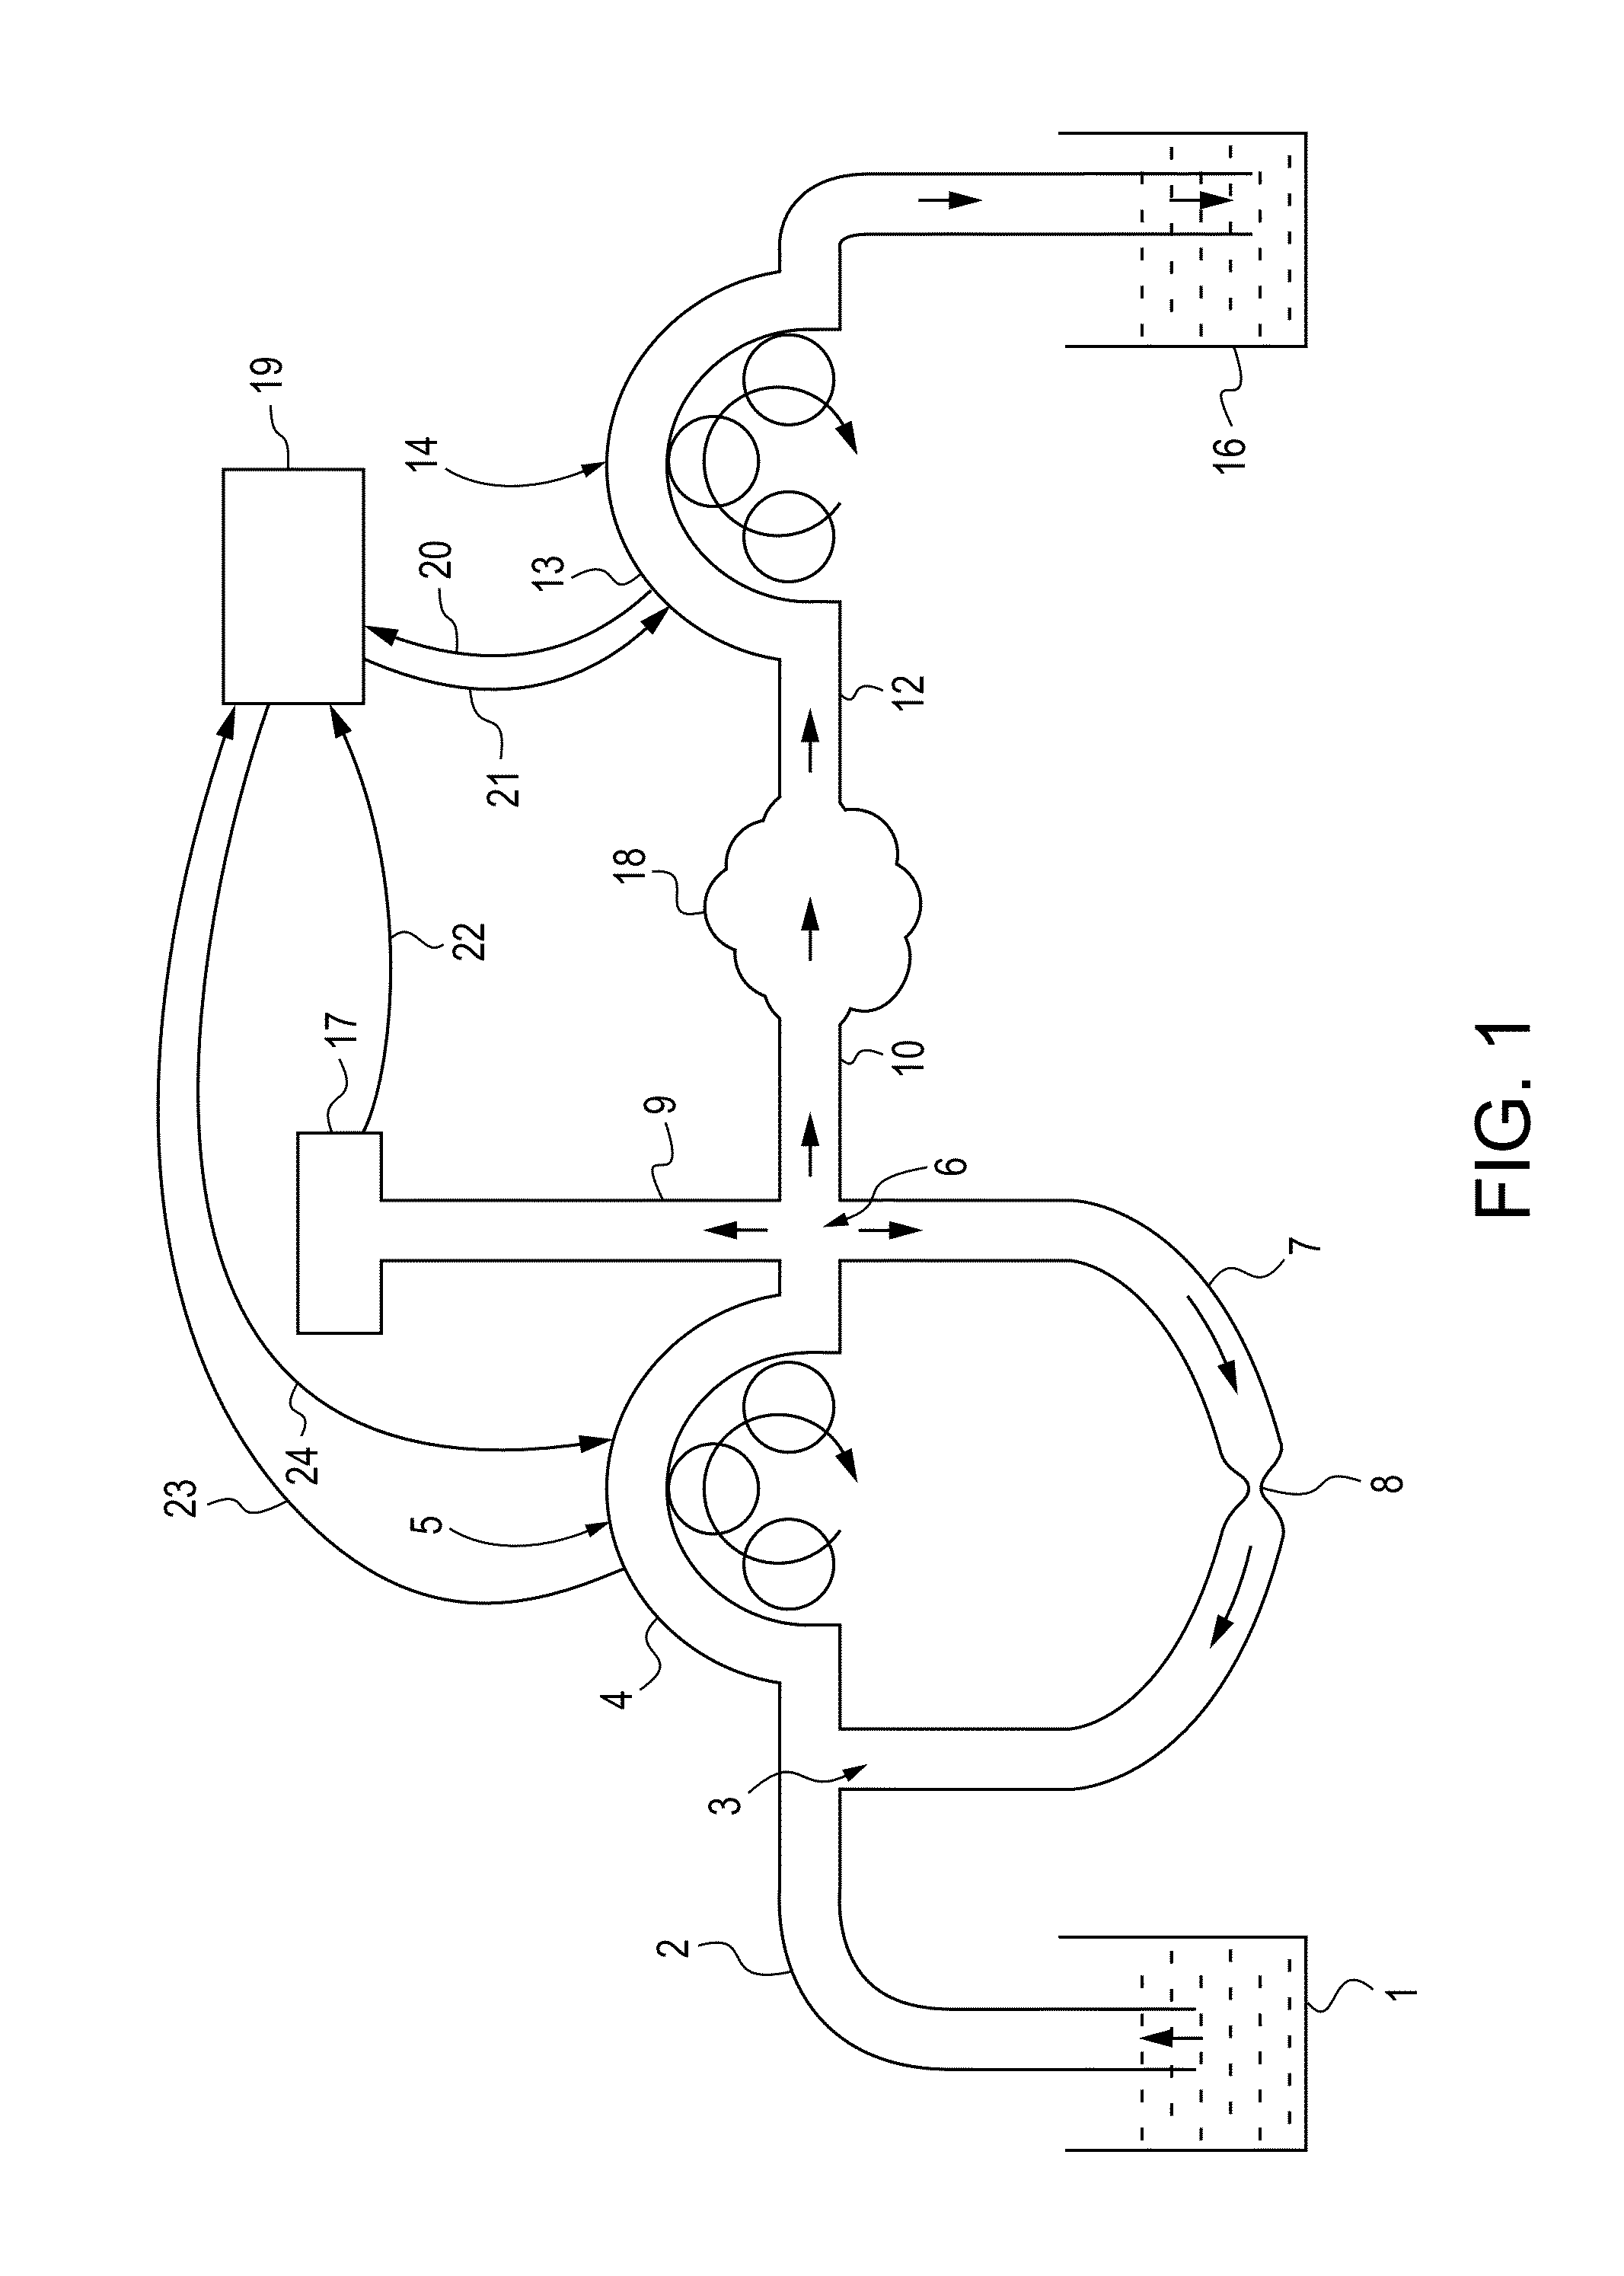 System for distending body tissue cavities by continuous flow irrigation